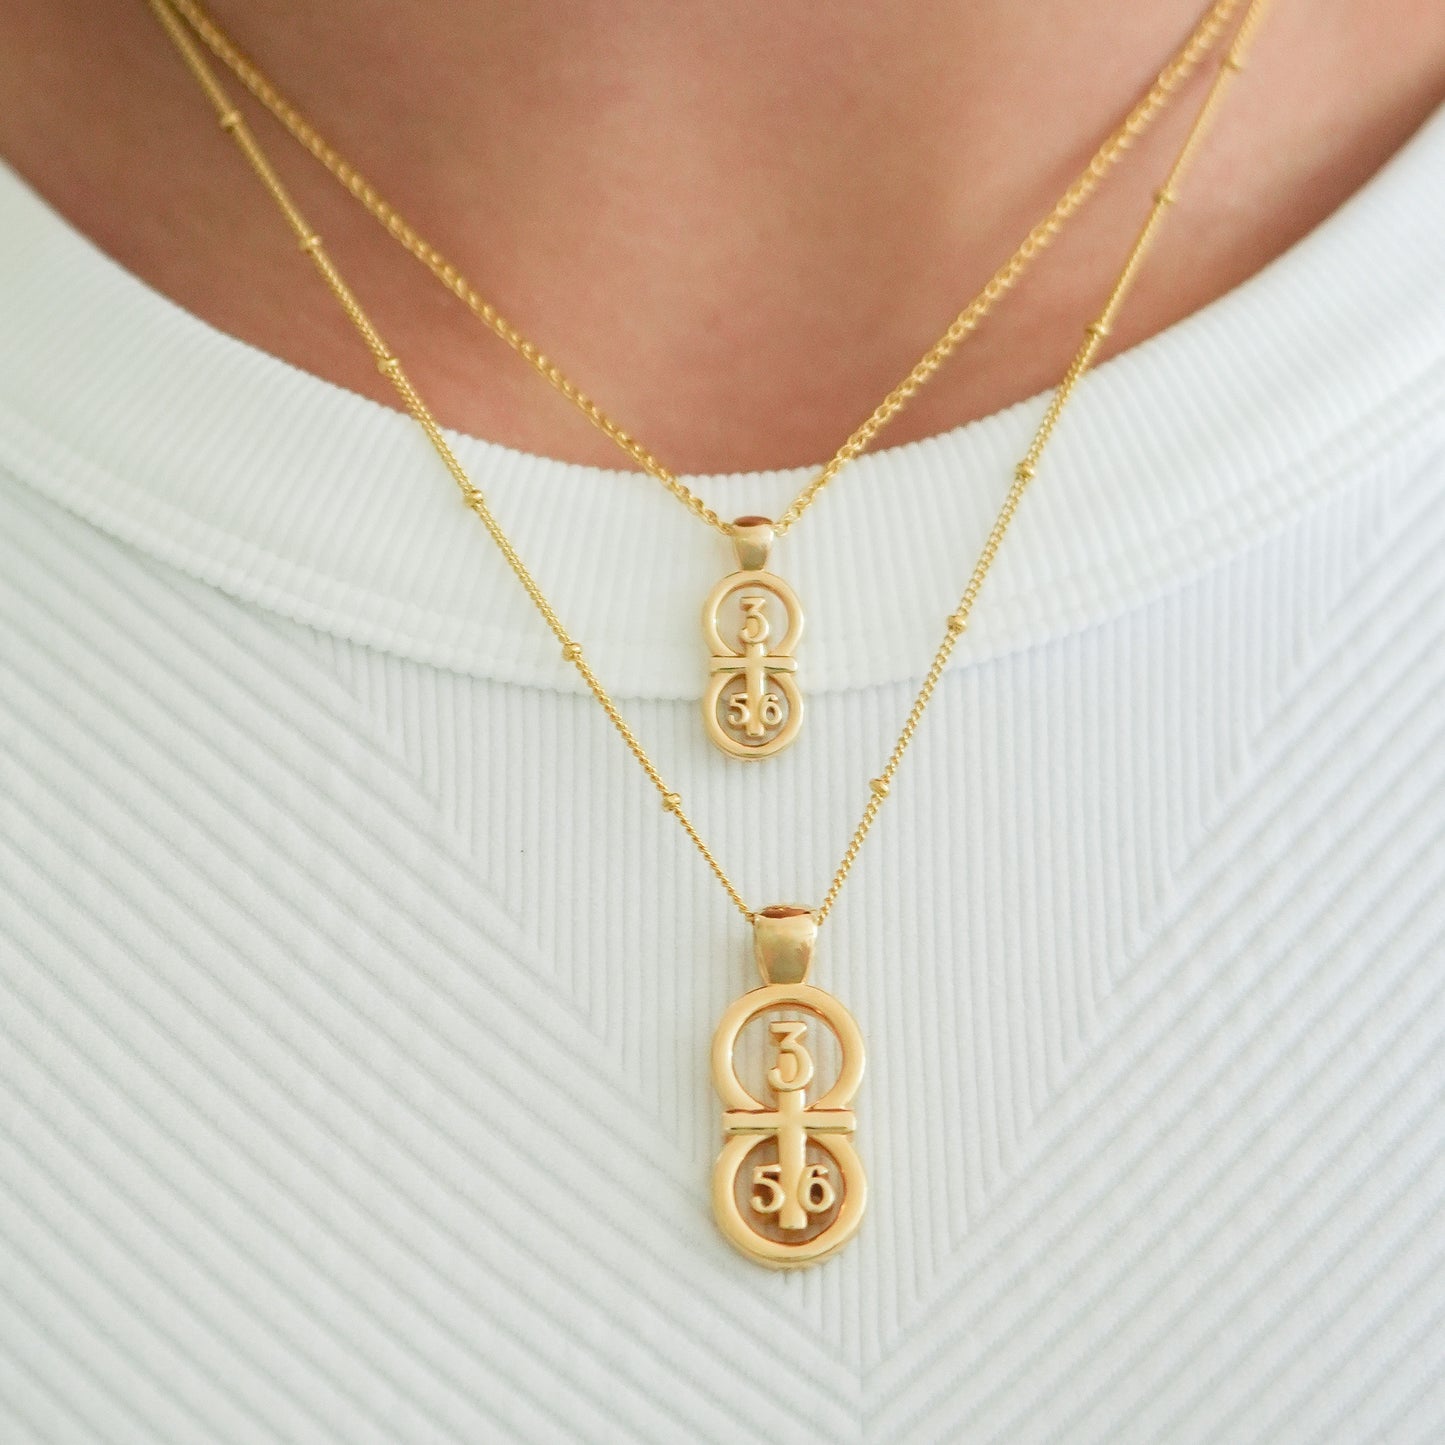 Gold small and large pendants displayed on the neck with this wheat chain and satellite chain on the larger pendant.  Our 29 and 11® pendant has the numbers 3, 5, and 6 intertwined with the cross to represent Proverbs 3:5-6 with the chapter word "Proverbs" inscribed on the back.